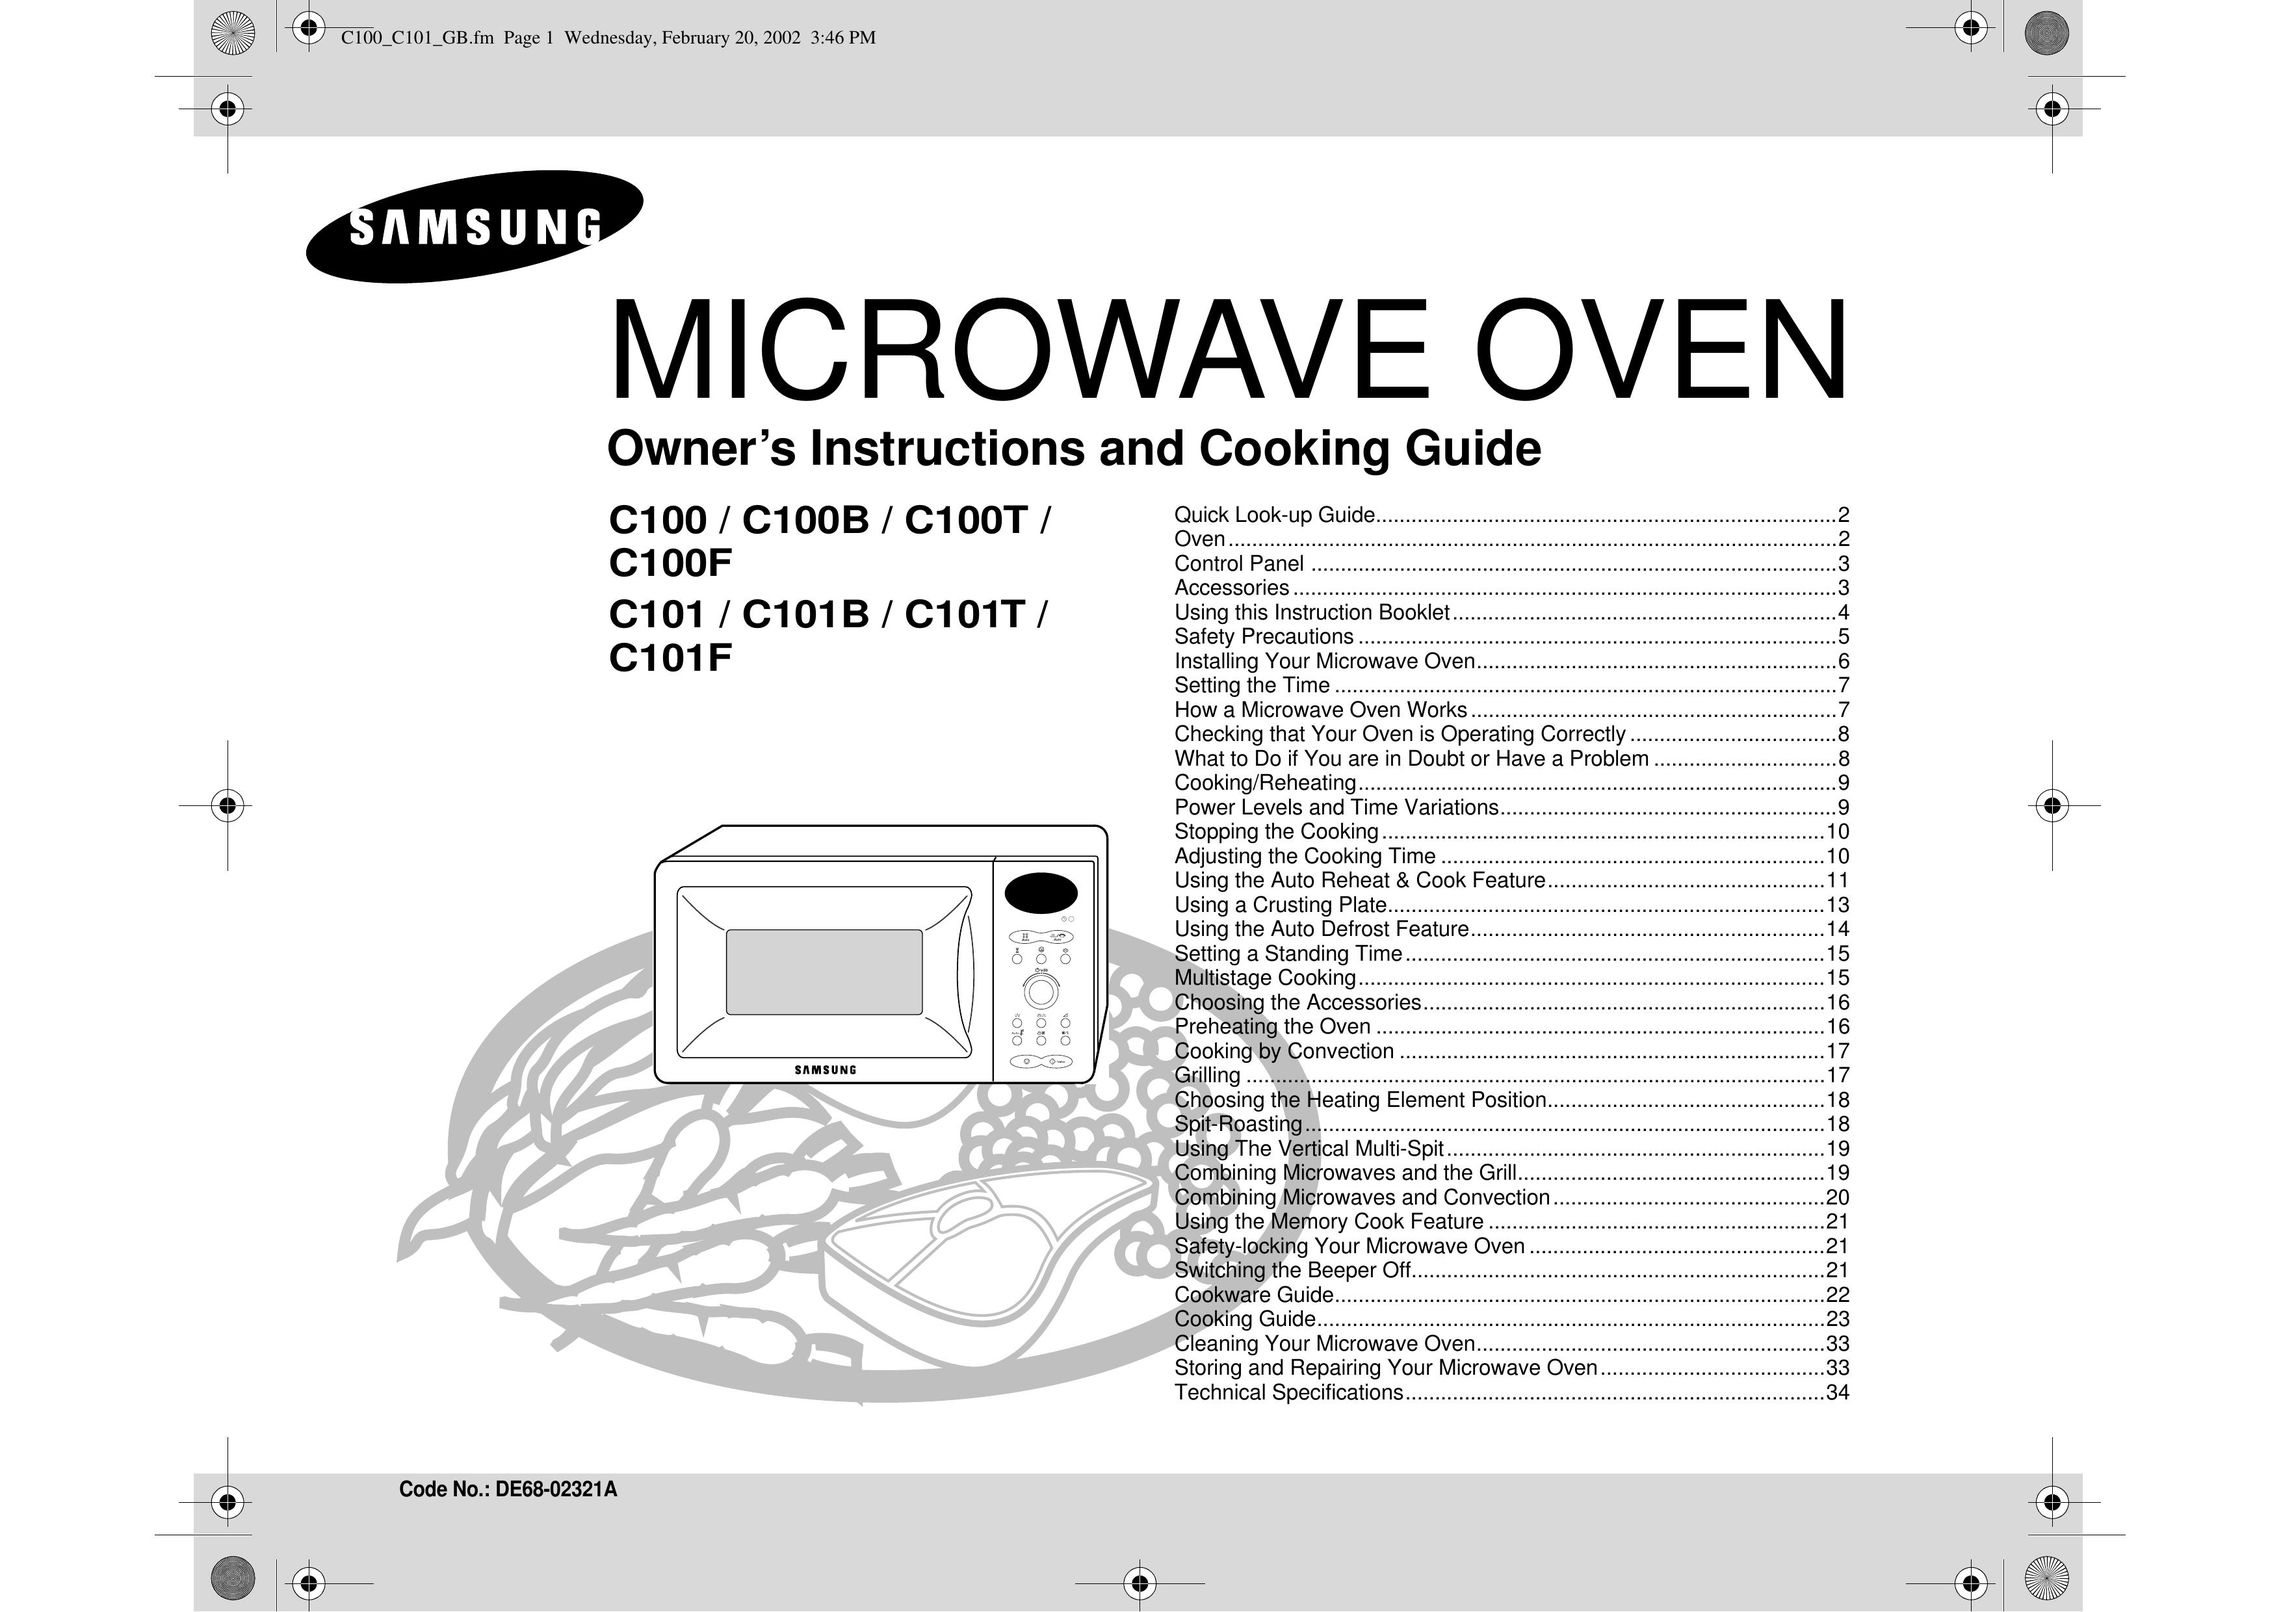 Samsung C100F Microwave Oven User Manual